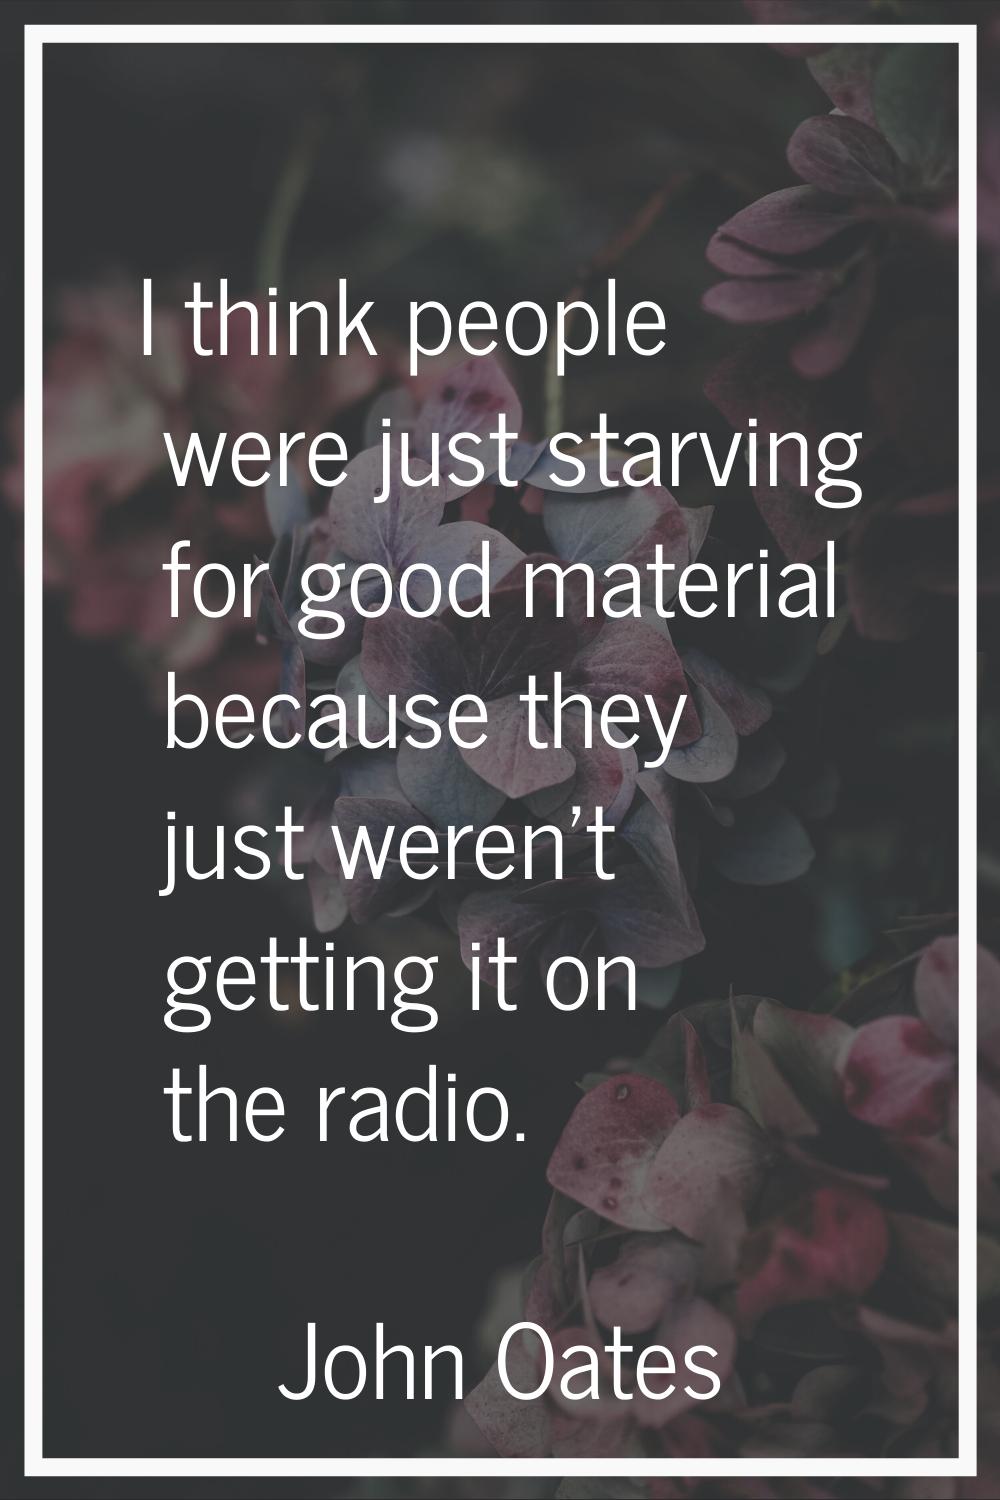 I think people were just starving for good material because they just weren't getting it on the rad